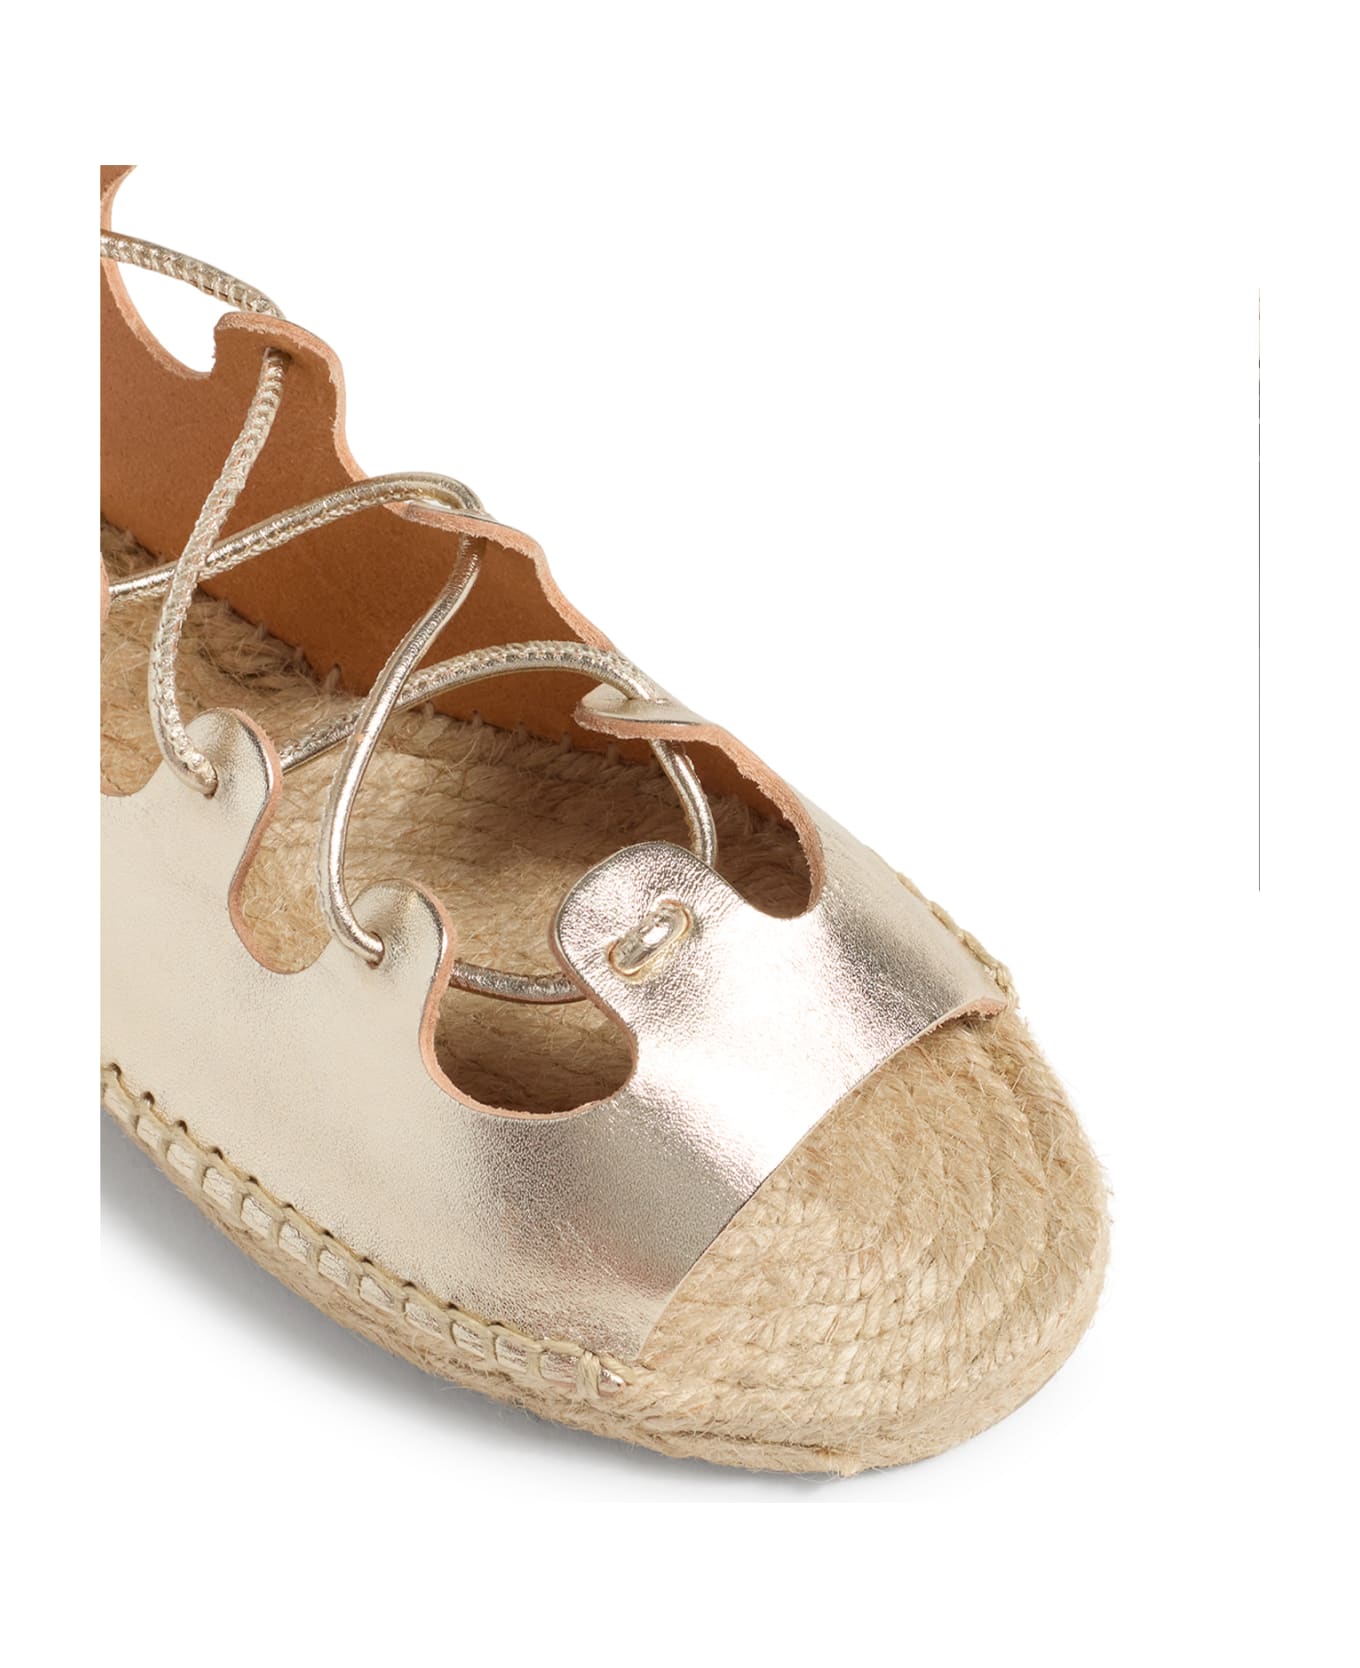 Castañer Laminated Leather Sandals With Laces - PLATINO